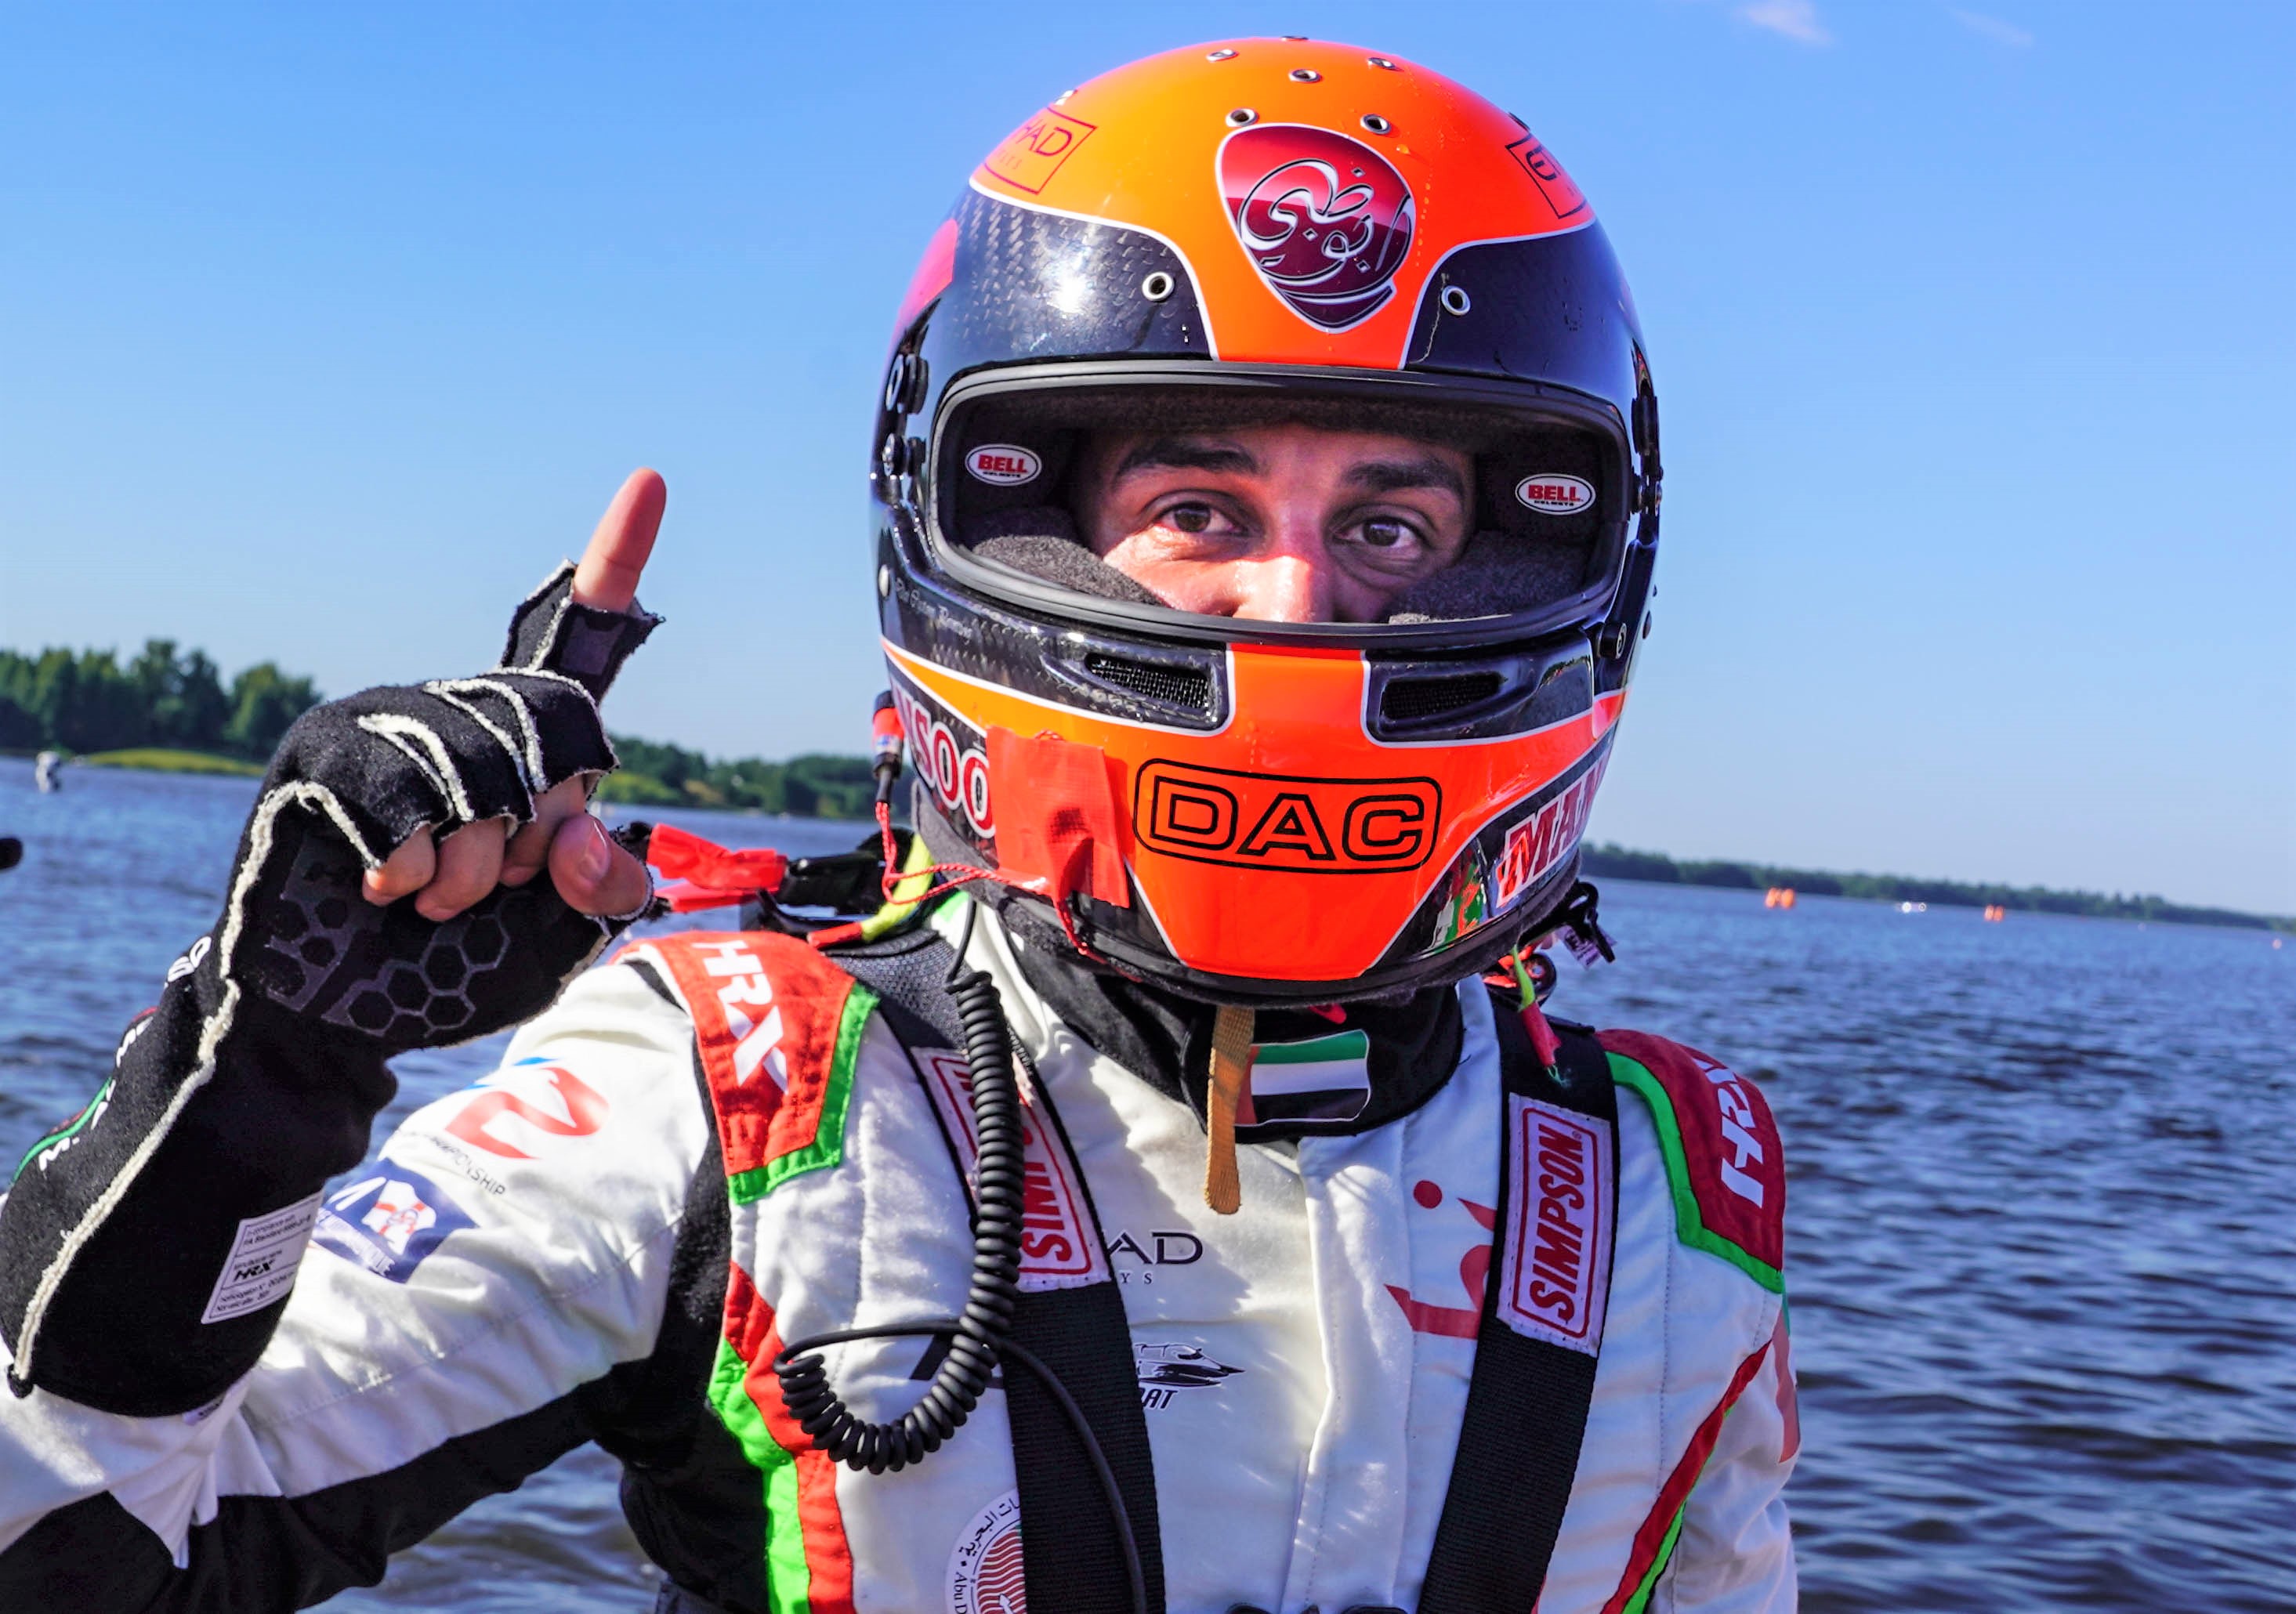 MANSOOR CLAIMS VICTORY IN LITHUANIA TO GRAB  LEAD IN WORLD TITLE RACE